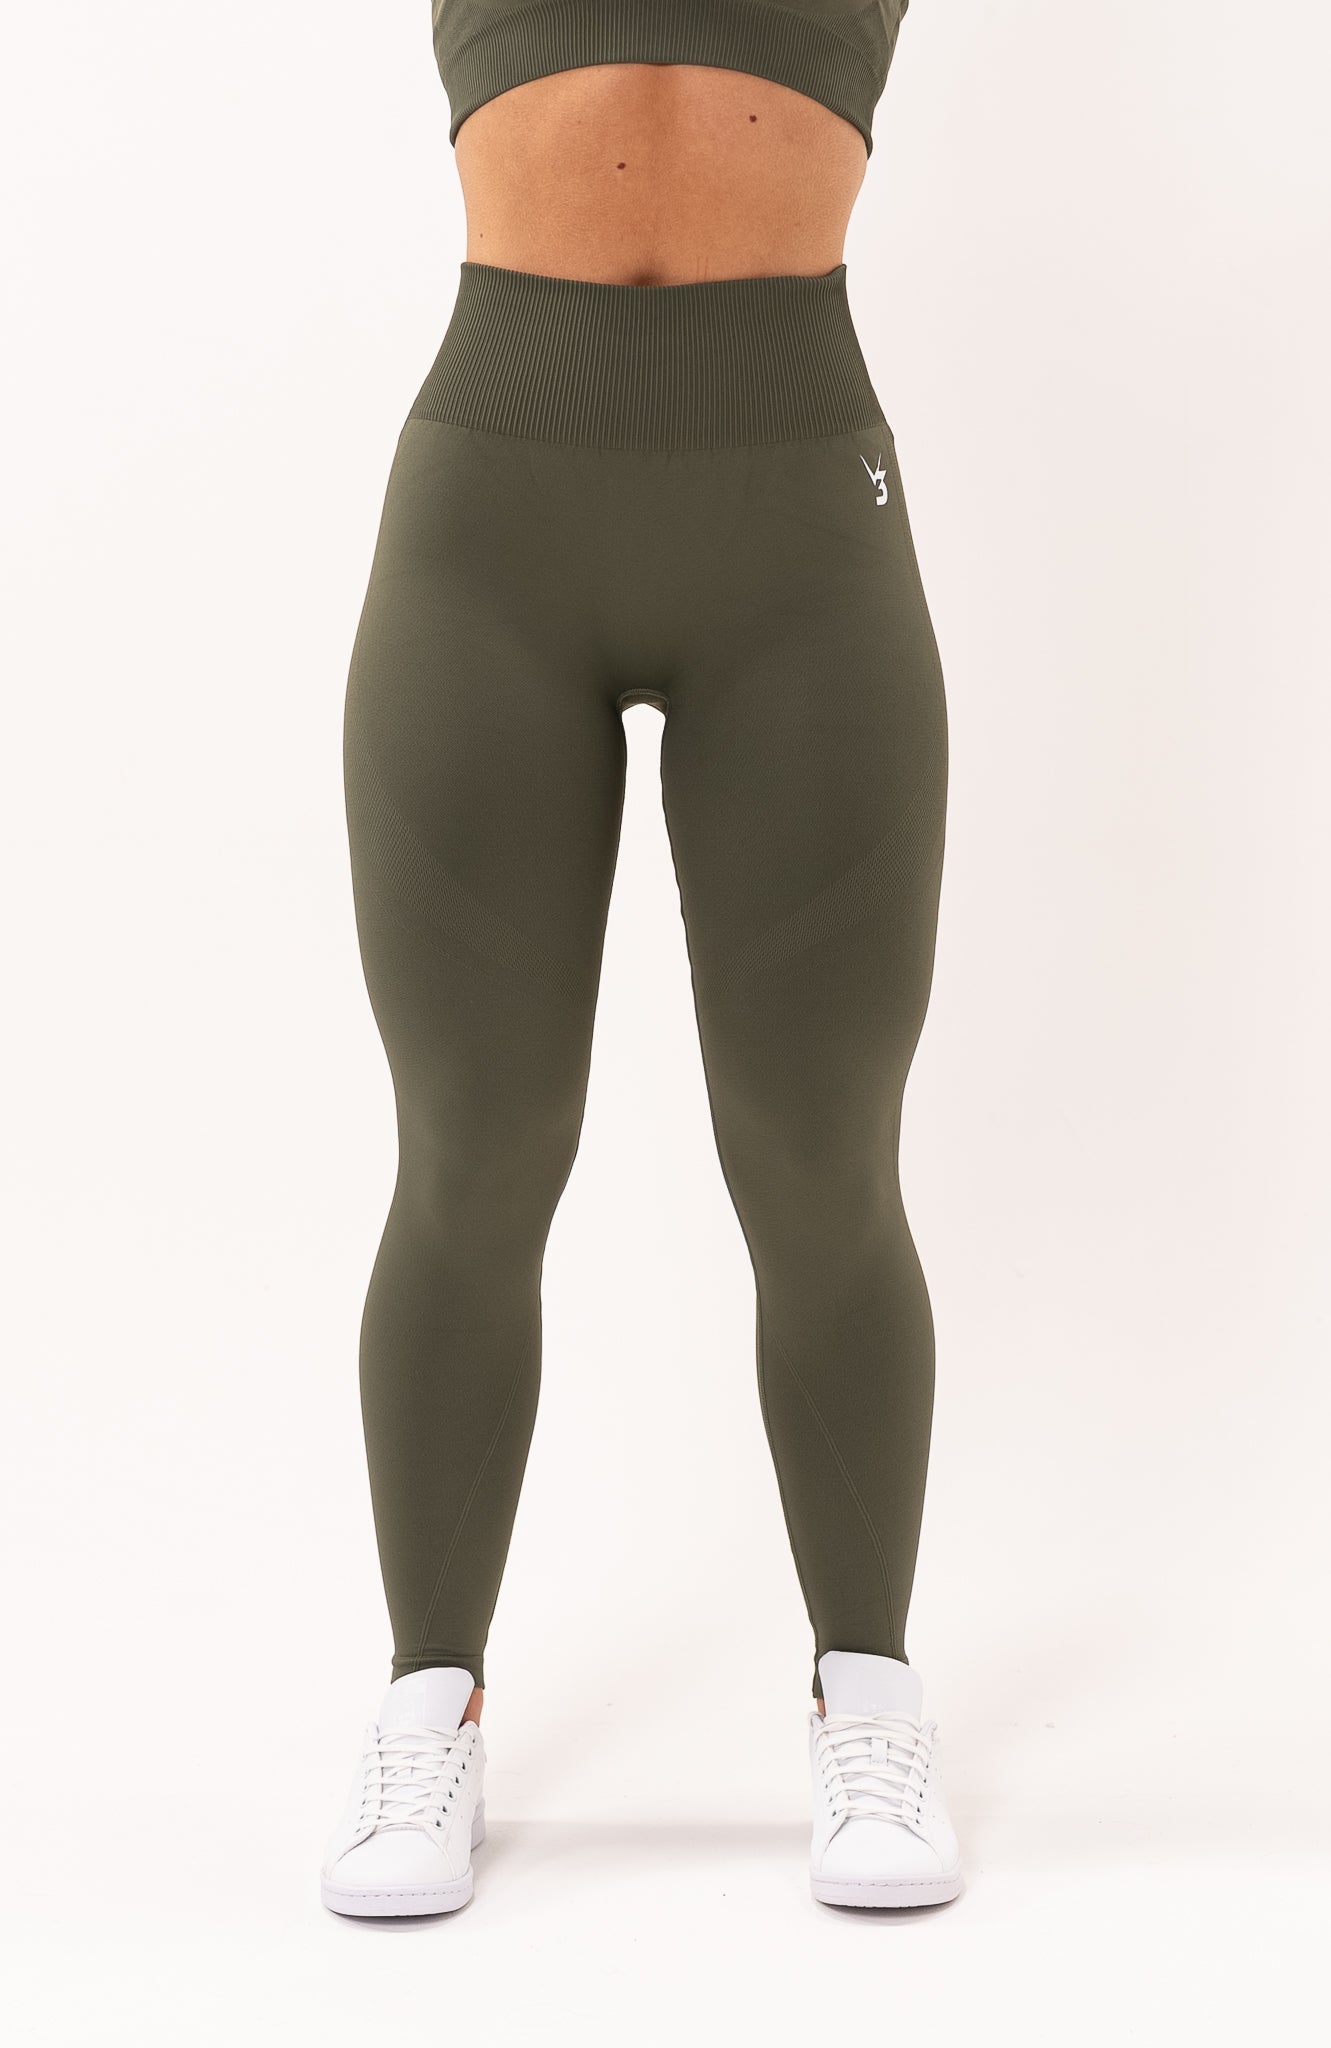 Seamless gym leggings. 10% OFF Your first order when you register